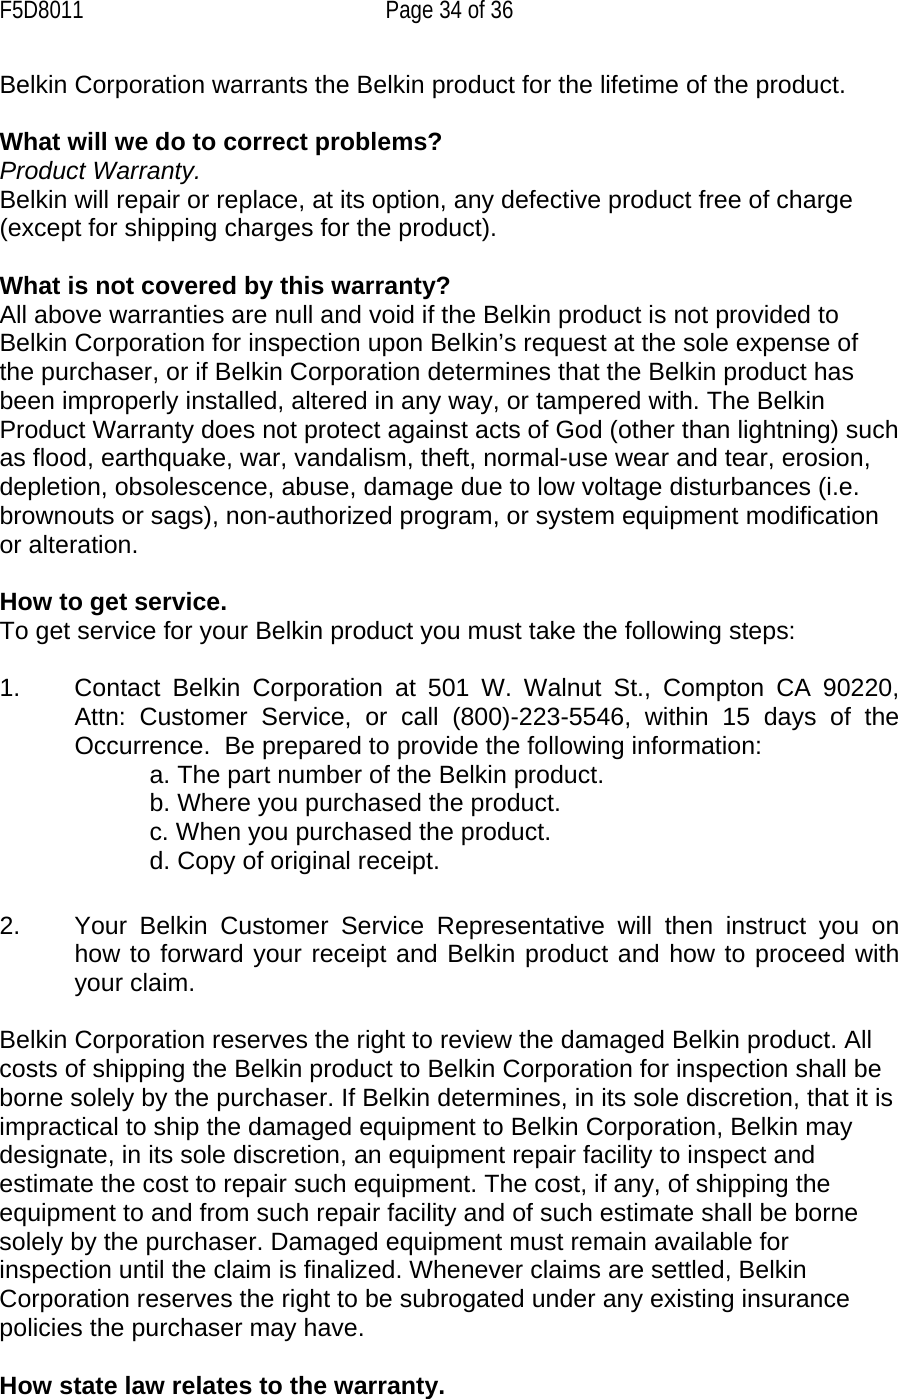 F5D8011  Page 34 of 36 Belkin Corporation warrants the Belkin product for the lifetime of the product.  What will we do to correct problems?  Product Warranty. Belkin will repair or replace, at its option, any defective product free of charge (except for shipping charges for the product).    What is not covered by this warranty? All above warranties are null and void if the Belkin product is not provided to Belkin Corporation for inspection upon Belkin’s request at the sole expense of the purchaser, or if Belkin Corporation determines that the Belkin product has been improperly installed, altered in any way, or tampered with. The Belkin Product Warranty does not protect against acts of God (other than lightning) such as flood, earthquake, war, vandalism, theft, normal-use wear and tear, erosion, depletion, obsolescence, abuse, damage due to low voltage disturbances (i.e. brownouts or sags), non-authorized program, or system equipment modification or alteration.  How to get service.    To get service for your Belkin product you must take the following steps:  1.  Contact Belkin Corporation at 501 W. Walnut St., Compton CA 90220, Attn: Customer Service, or call (800)-223-5546, within 15 days of the Occurrence.  Be prepared to provide the following information: a. The part number of the Belkin product. b. Where you purchased the product. c. When you purchased the product. d. Copy of original receipt.  2.  Your Belkin Customer Service Representative will then instruct you on how to forward your receipt and Belkin product and how to proceed with your claim.  Belkin Corporation reserves the right to review the damaged Belkin product. All costs of shipping the Belkin product to Belkin Corporation for inspection shall be borne solely by the purchaser. If Belkin determines, in its sole discretion, that it is impractical to ship the damaged equipment to Belkin Corporation, Belkin may designate, in its sole discretion, an equipment repair facility to inspect and estimate the cost to repair such equipment. The cost, if any, of shipping the equipment to and from such repair facility and of such estimate shall be borne solely by the purchaser. Damaged equipment must remain available for inspection until the claim is finalized. Whenever claims are settled, Belkin Corporation reserves the right to be subrogated under any existing insurance policies the purchaser may have.   How state law relates to the warranty. 